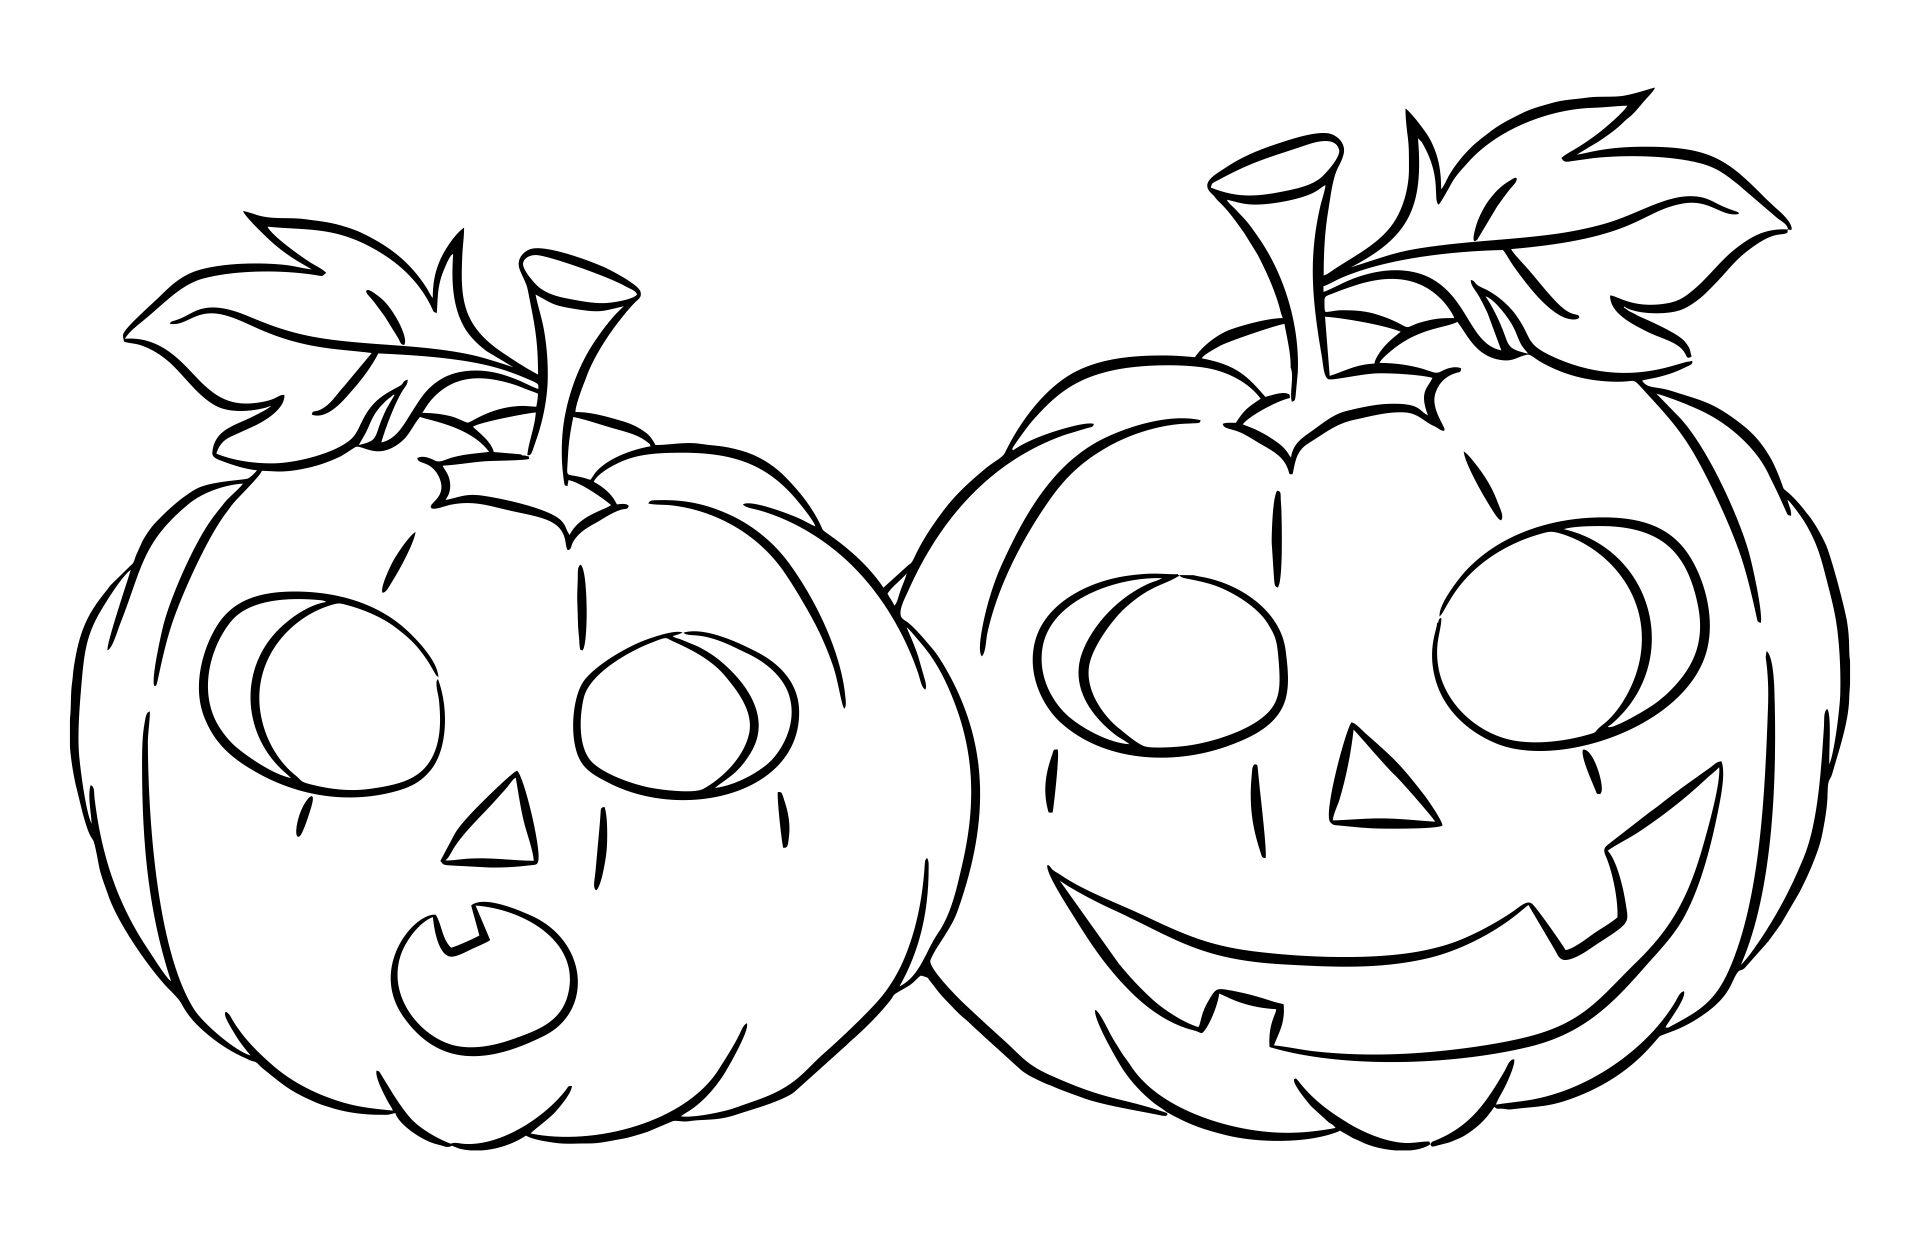 Halloween Pumpkins Printable Coloring Pages For Kids